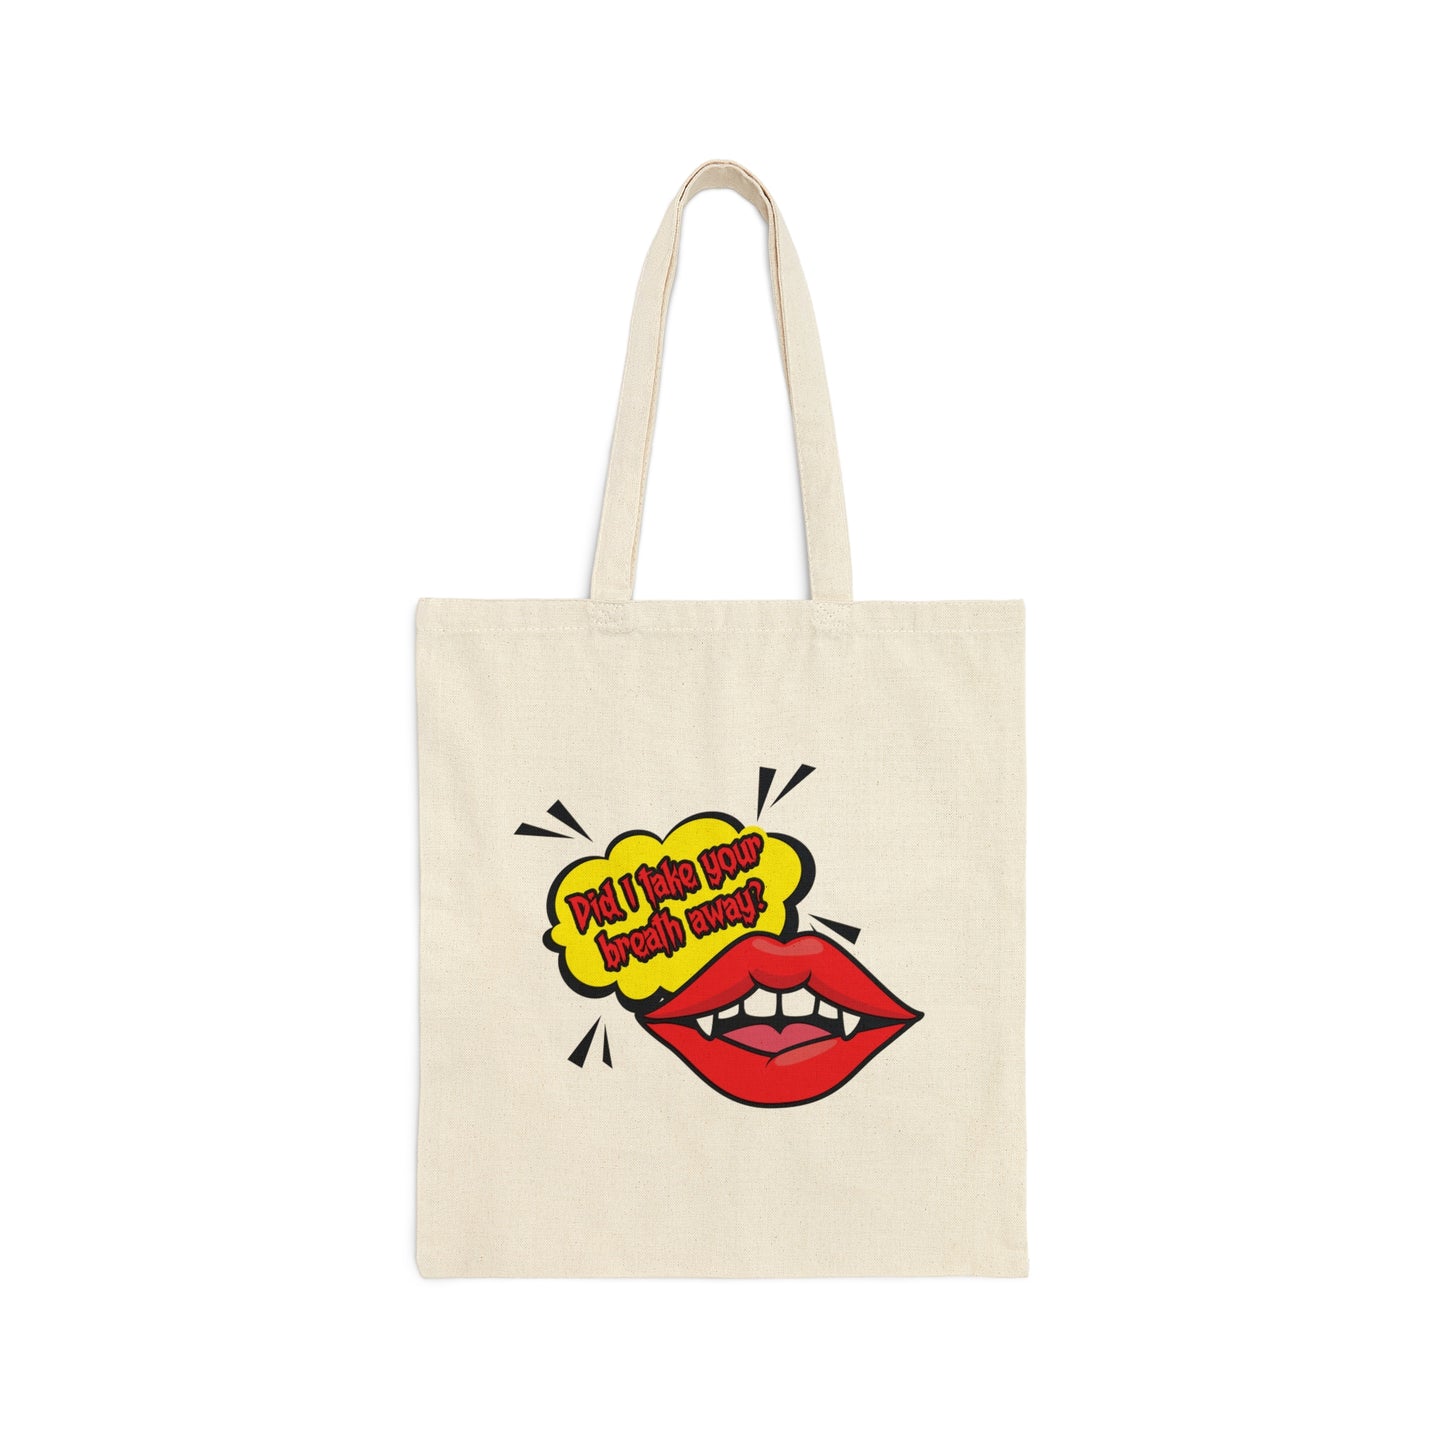 Did I Take Your Breath Away? Vampire TV Series Canvas Shopping Cotton Tote Bag